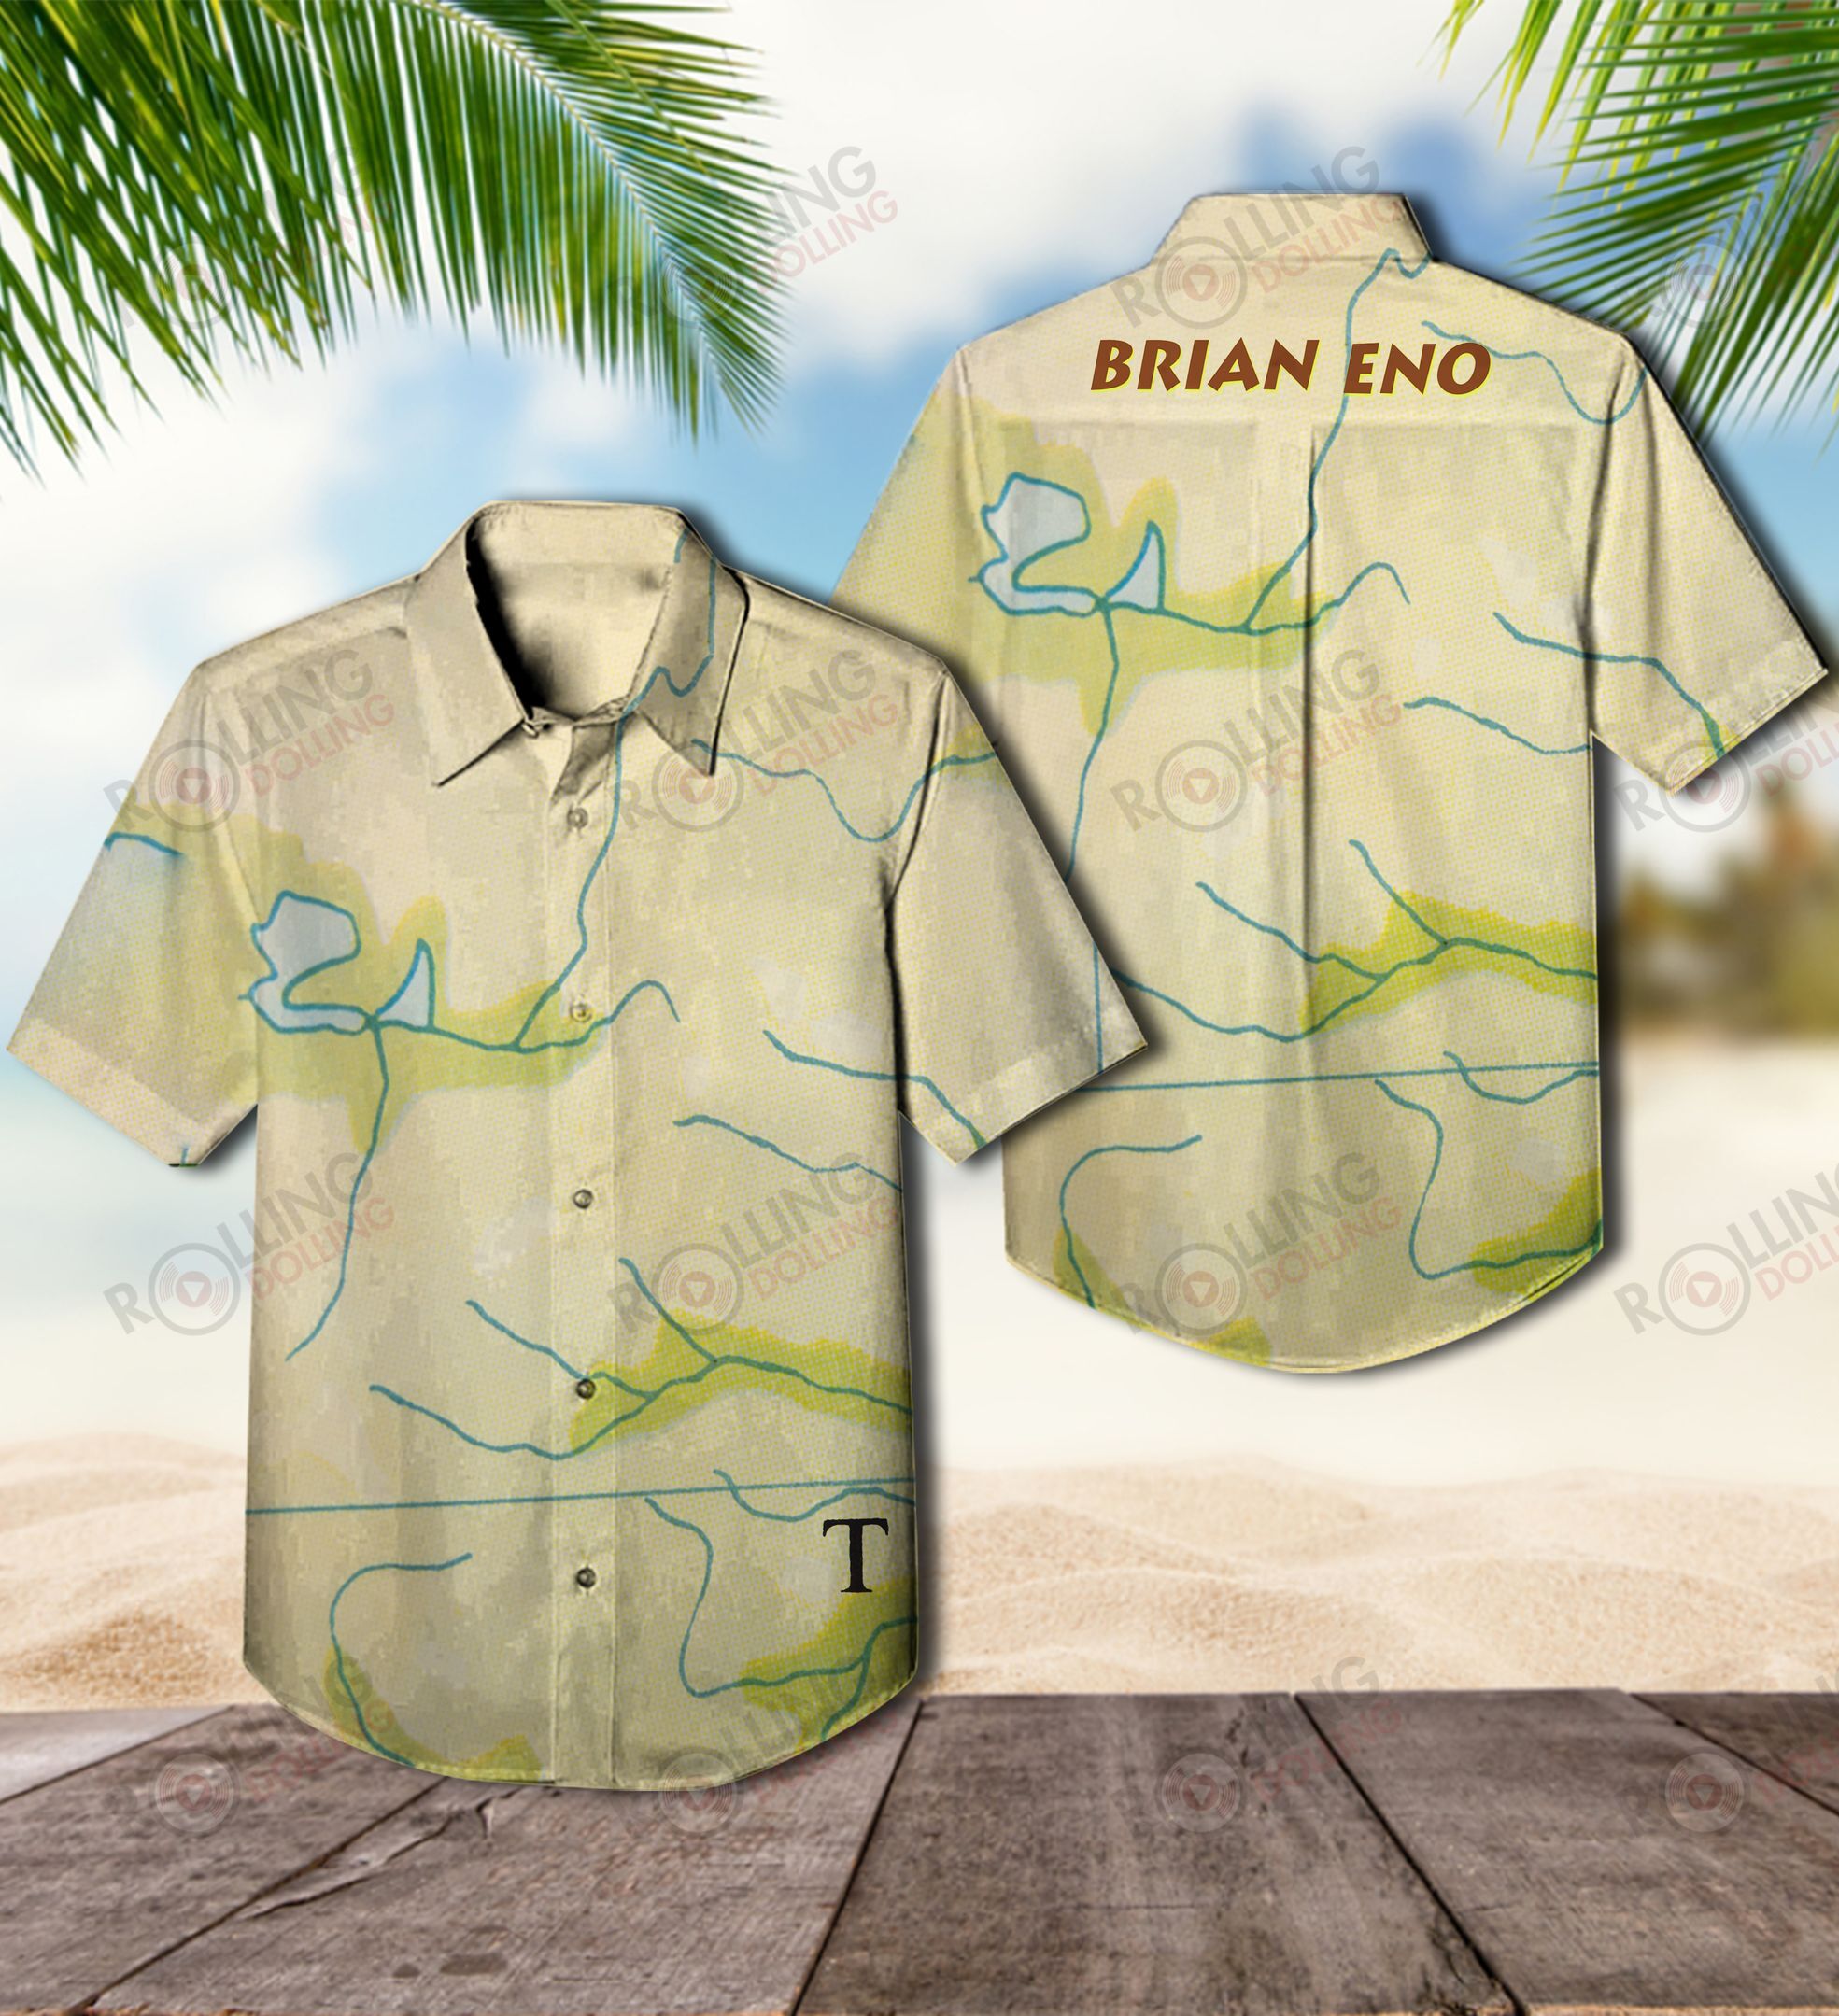 This would make a great gift for any fan who loves Hawaiian Shirt as well as Rock band 25